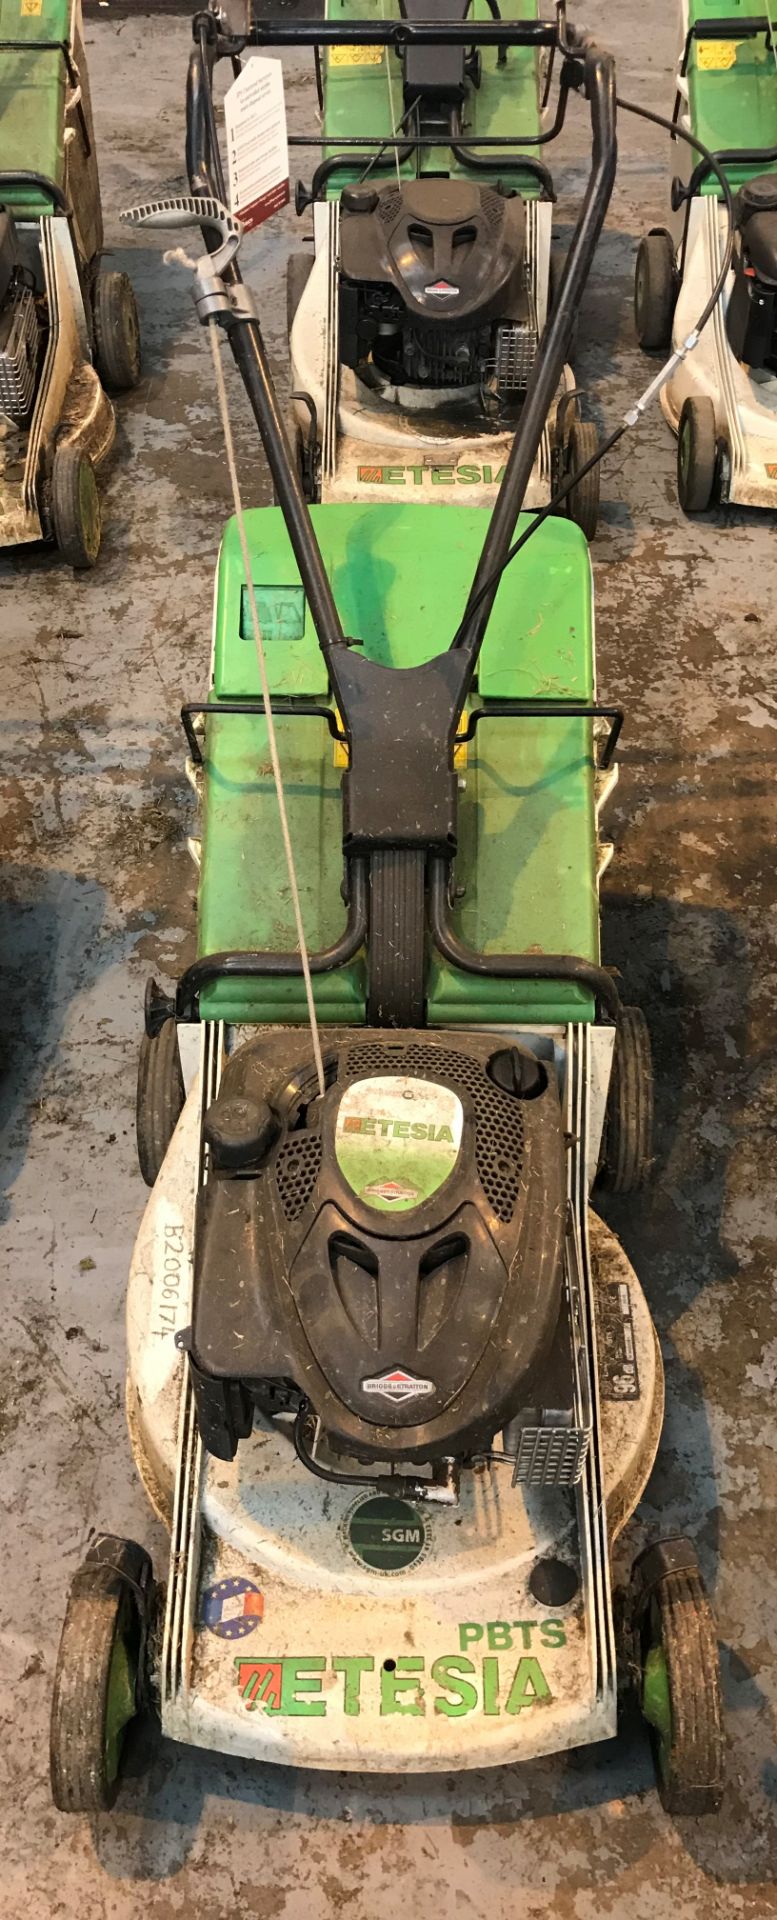 Etesia PBTS Self Propelled Commercial Lawn Mower | 2013